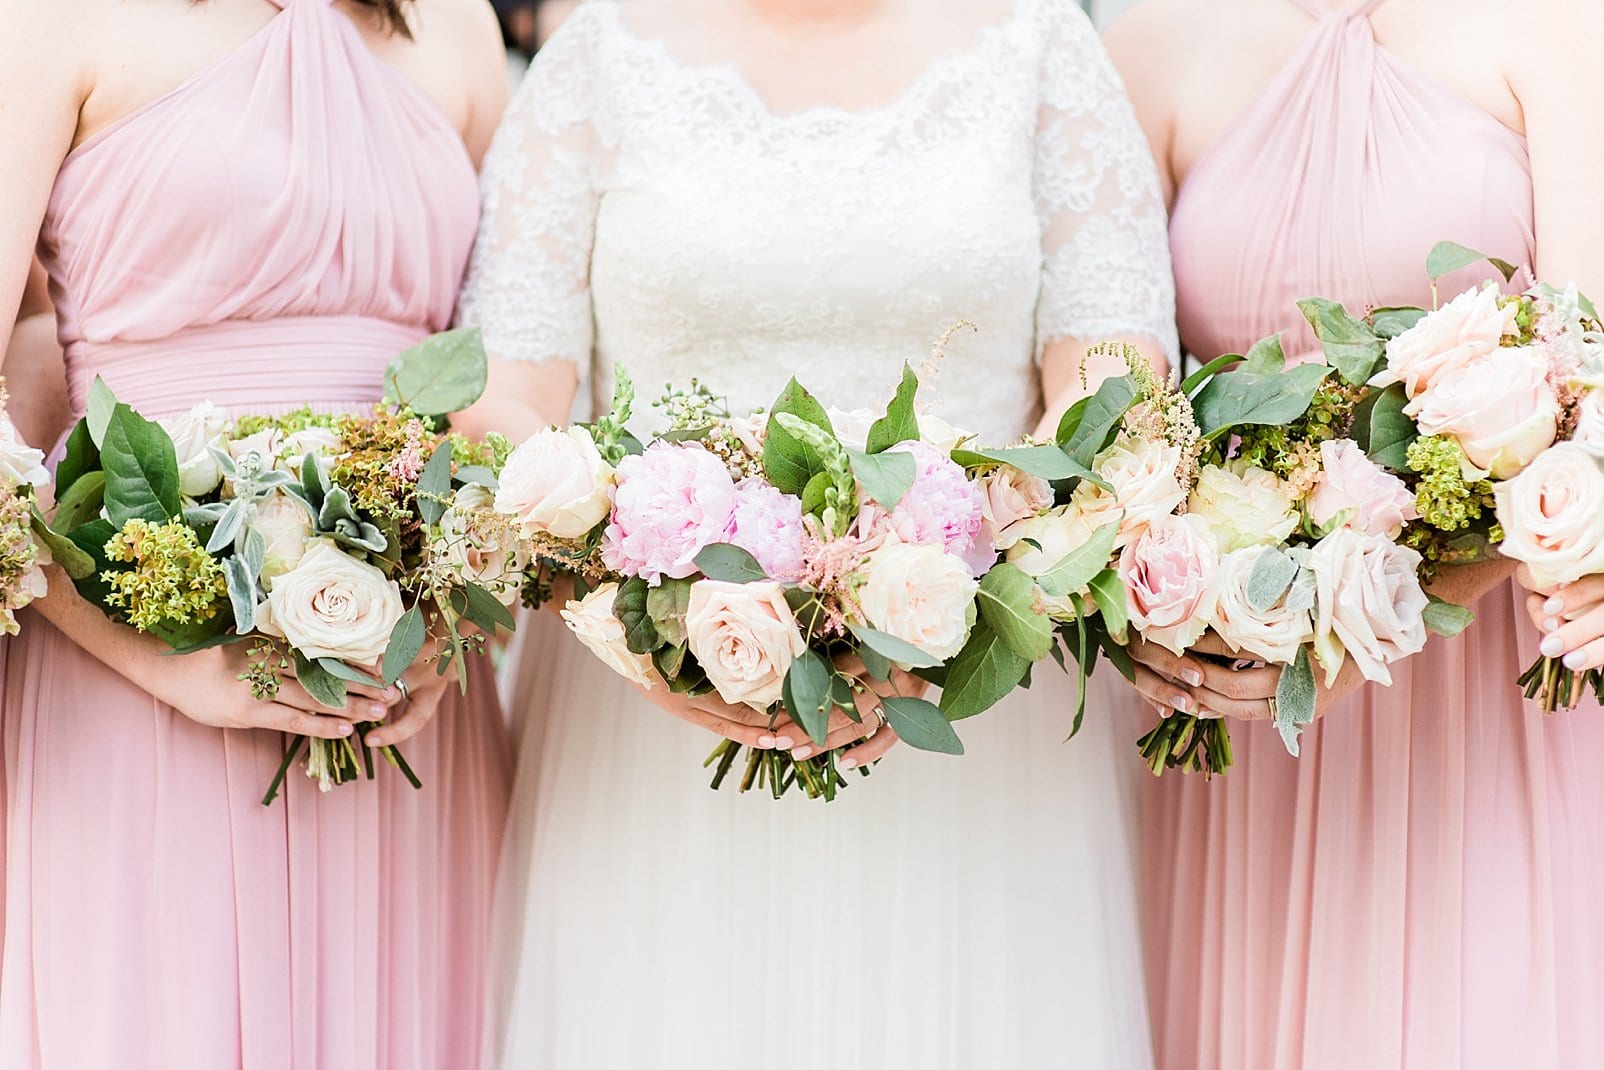 bushel and peck designs bridal bouquet with white and light pink flowers photo